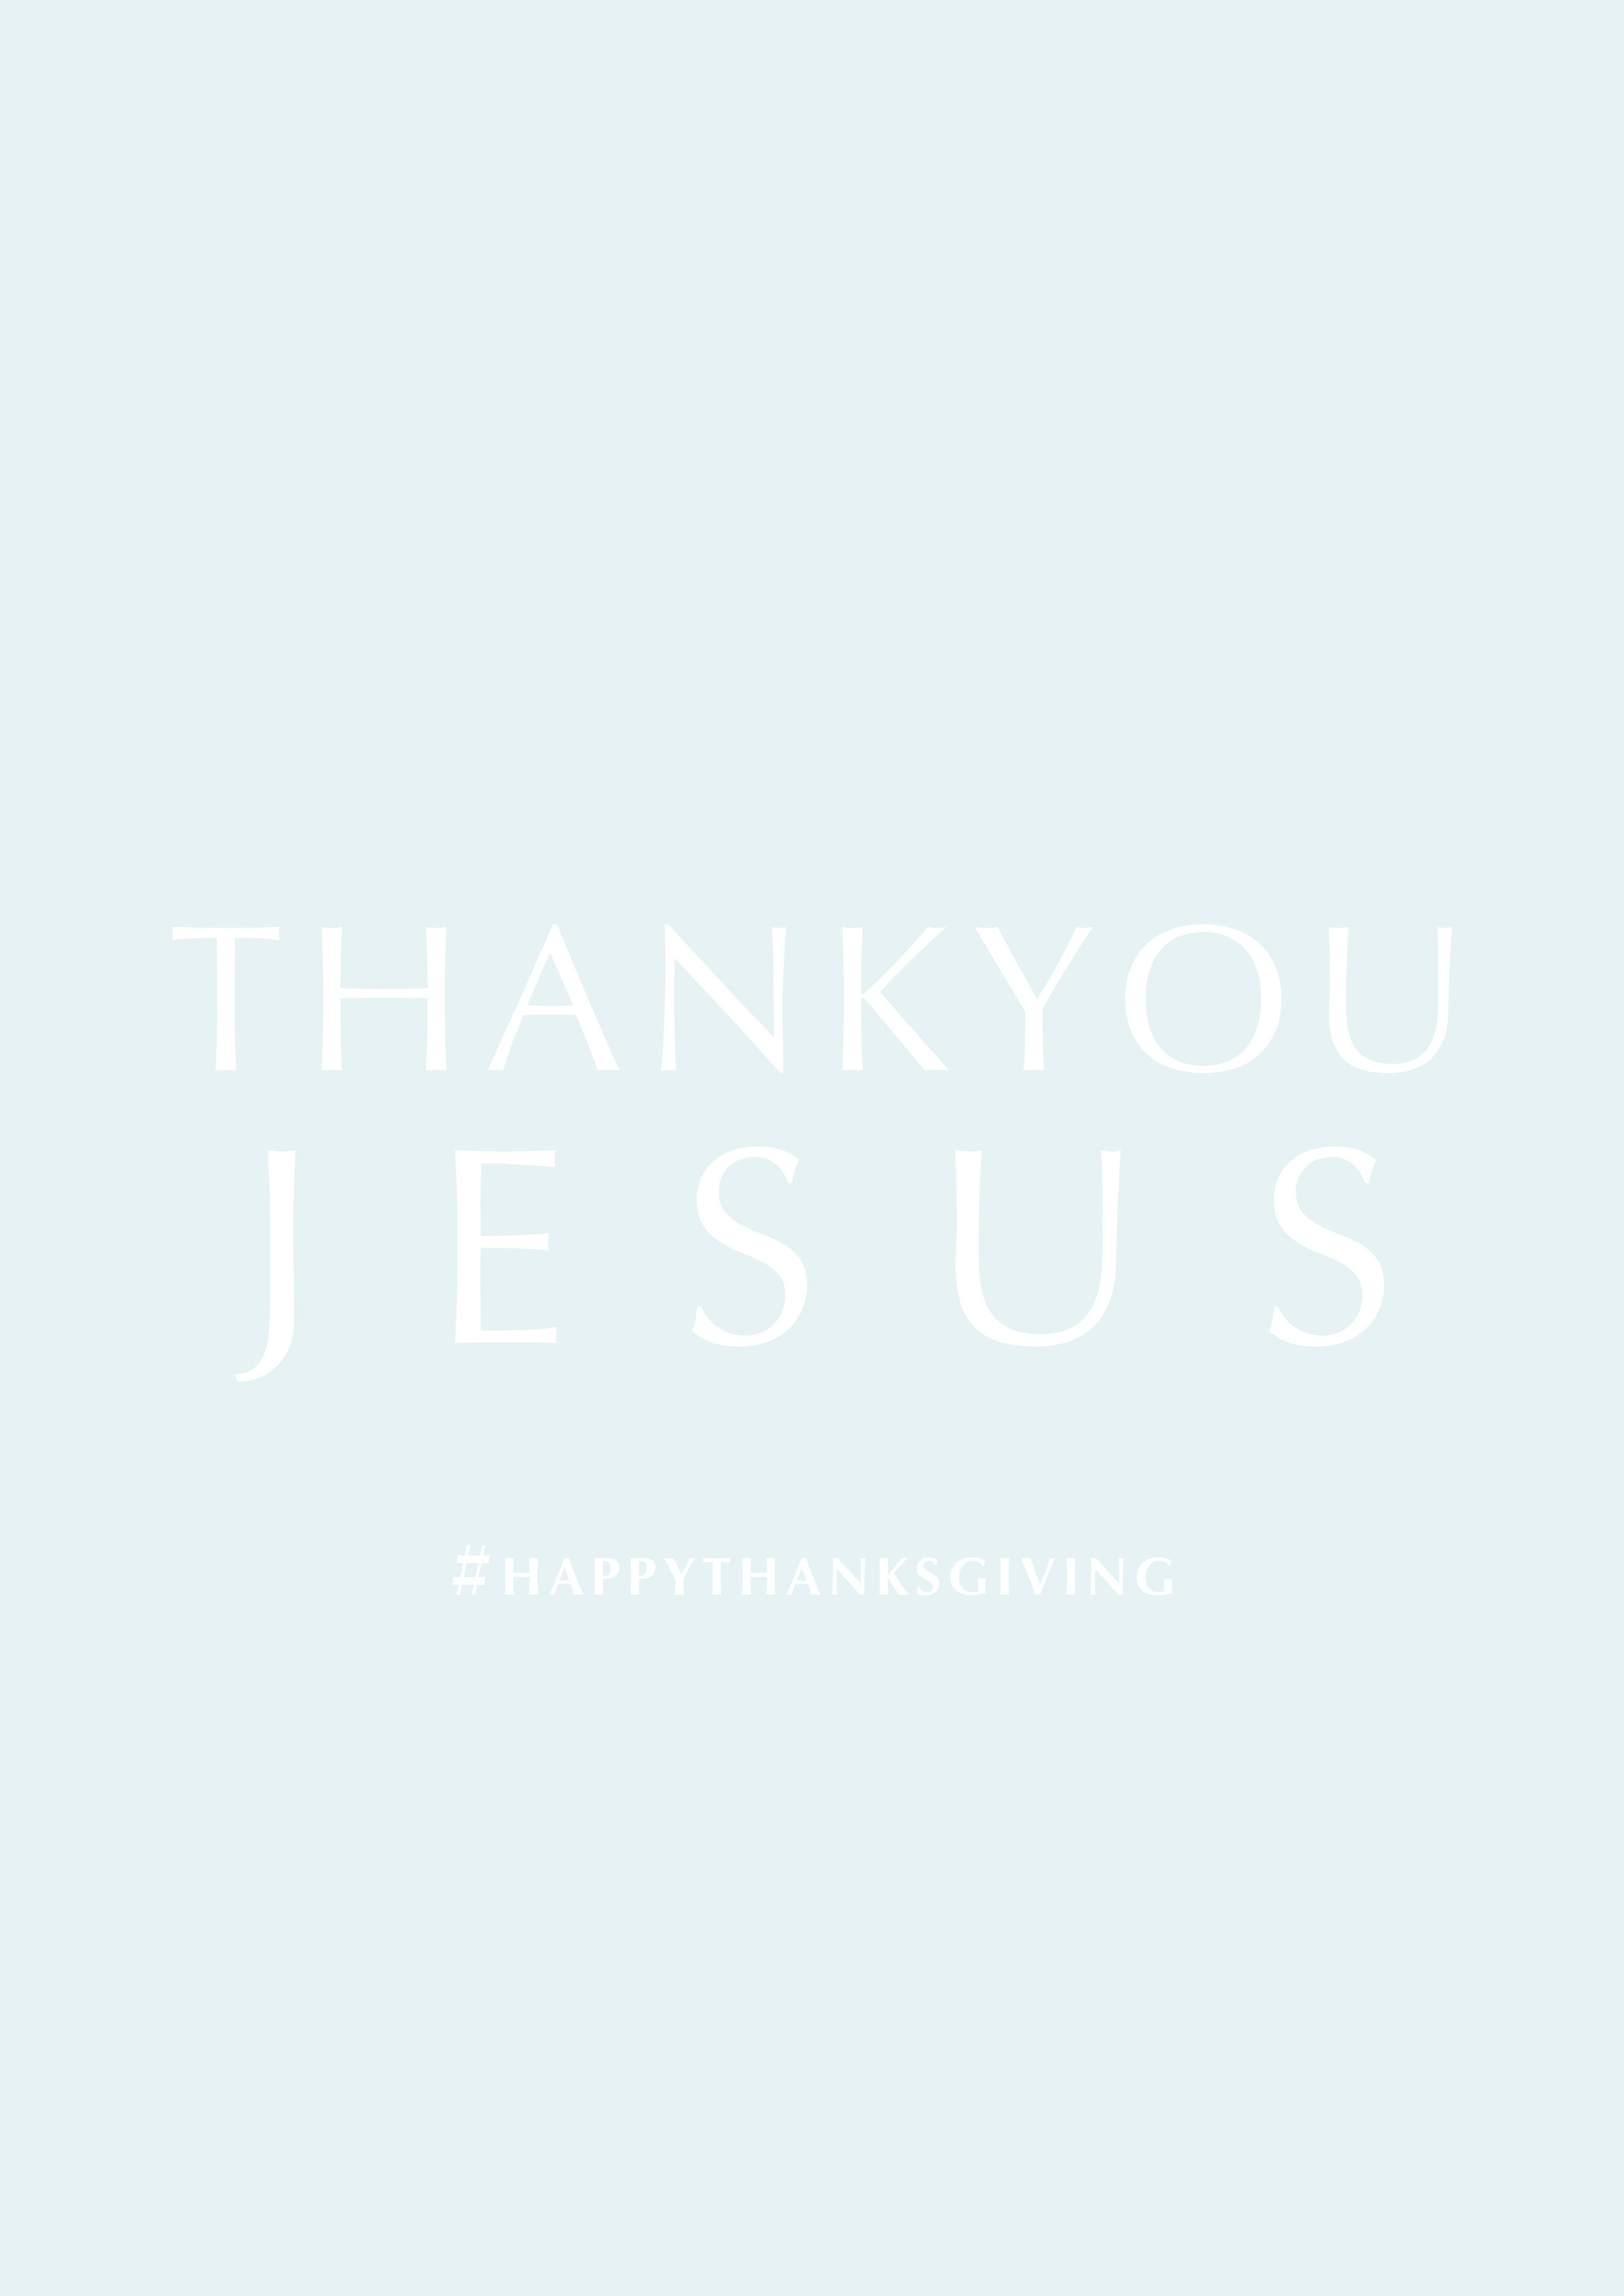 Happy Thanksgiving, Printable, Jesus, Christian Quotes, Christ Like, White, Minimalist, Fall, Wallpaper, IPh. Christian Quotes, Thanksgiving Quotes, Autumn Quotes